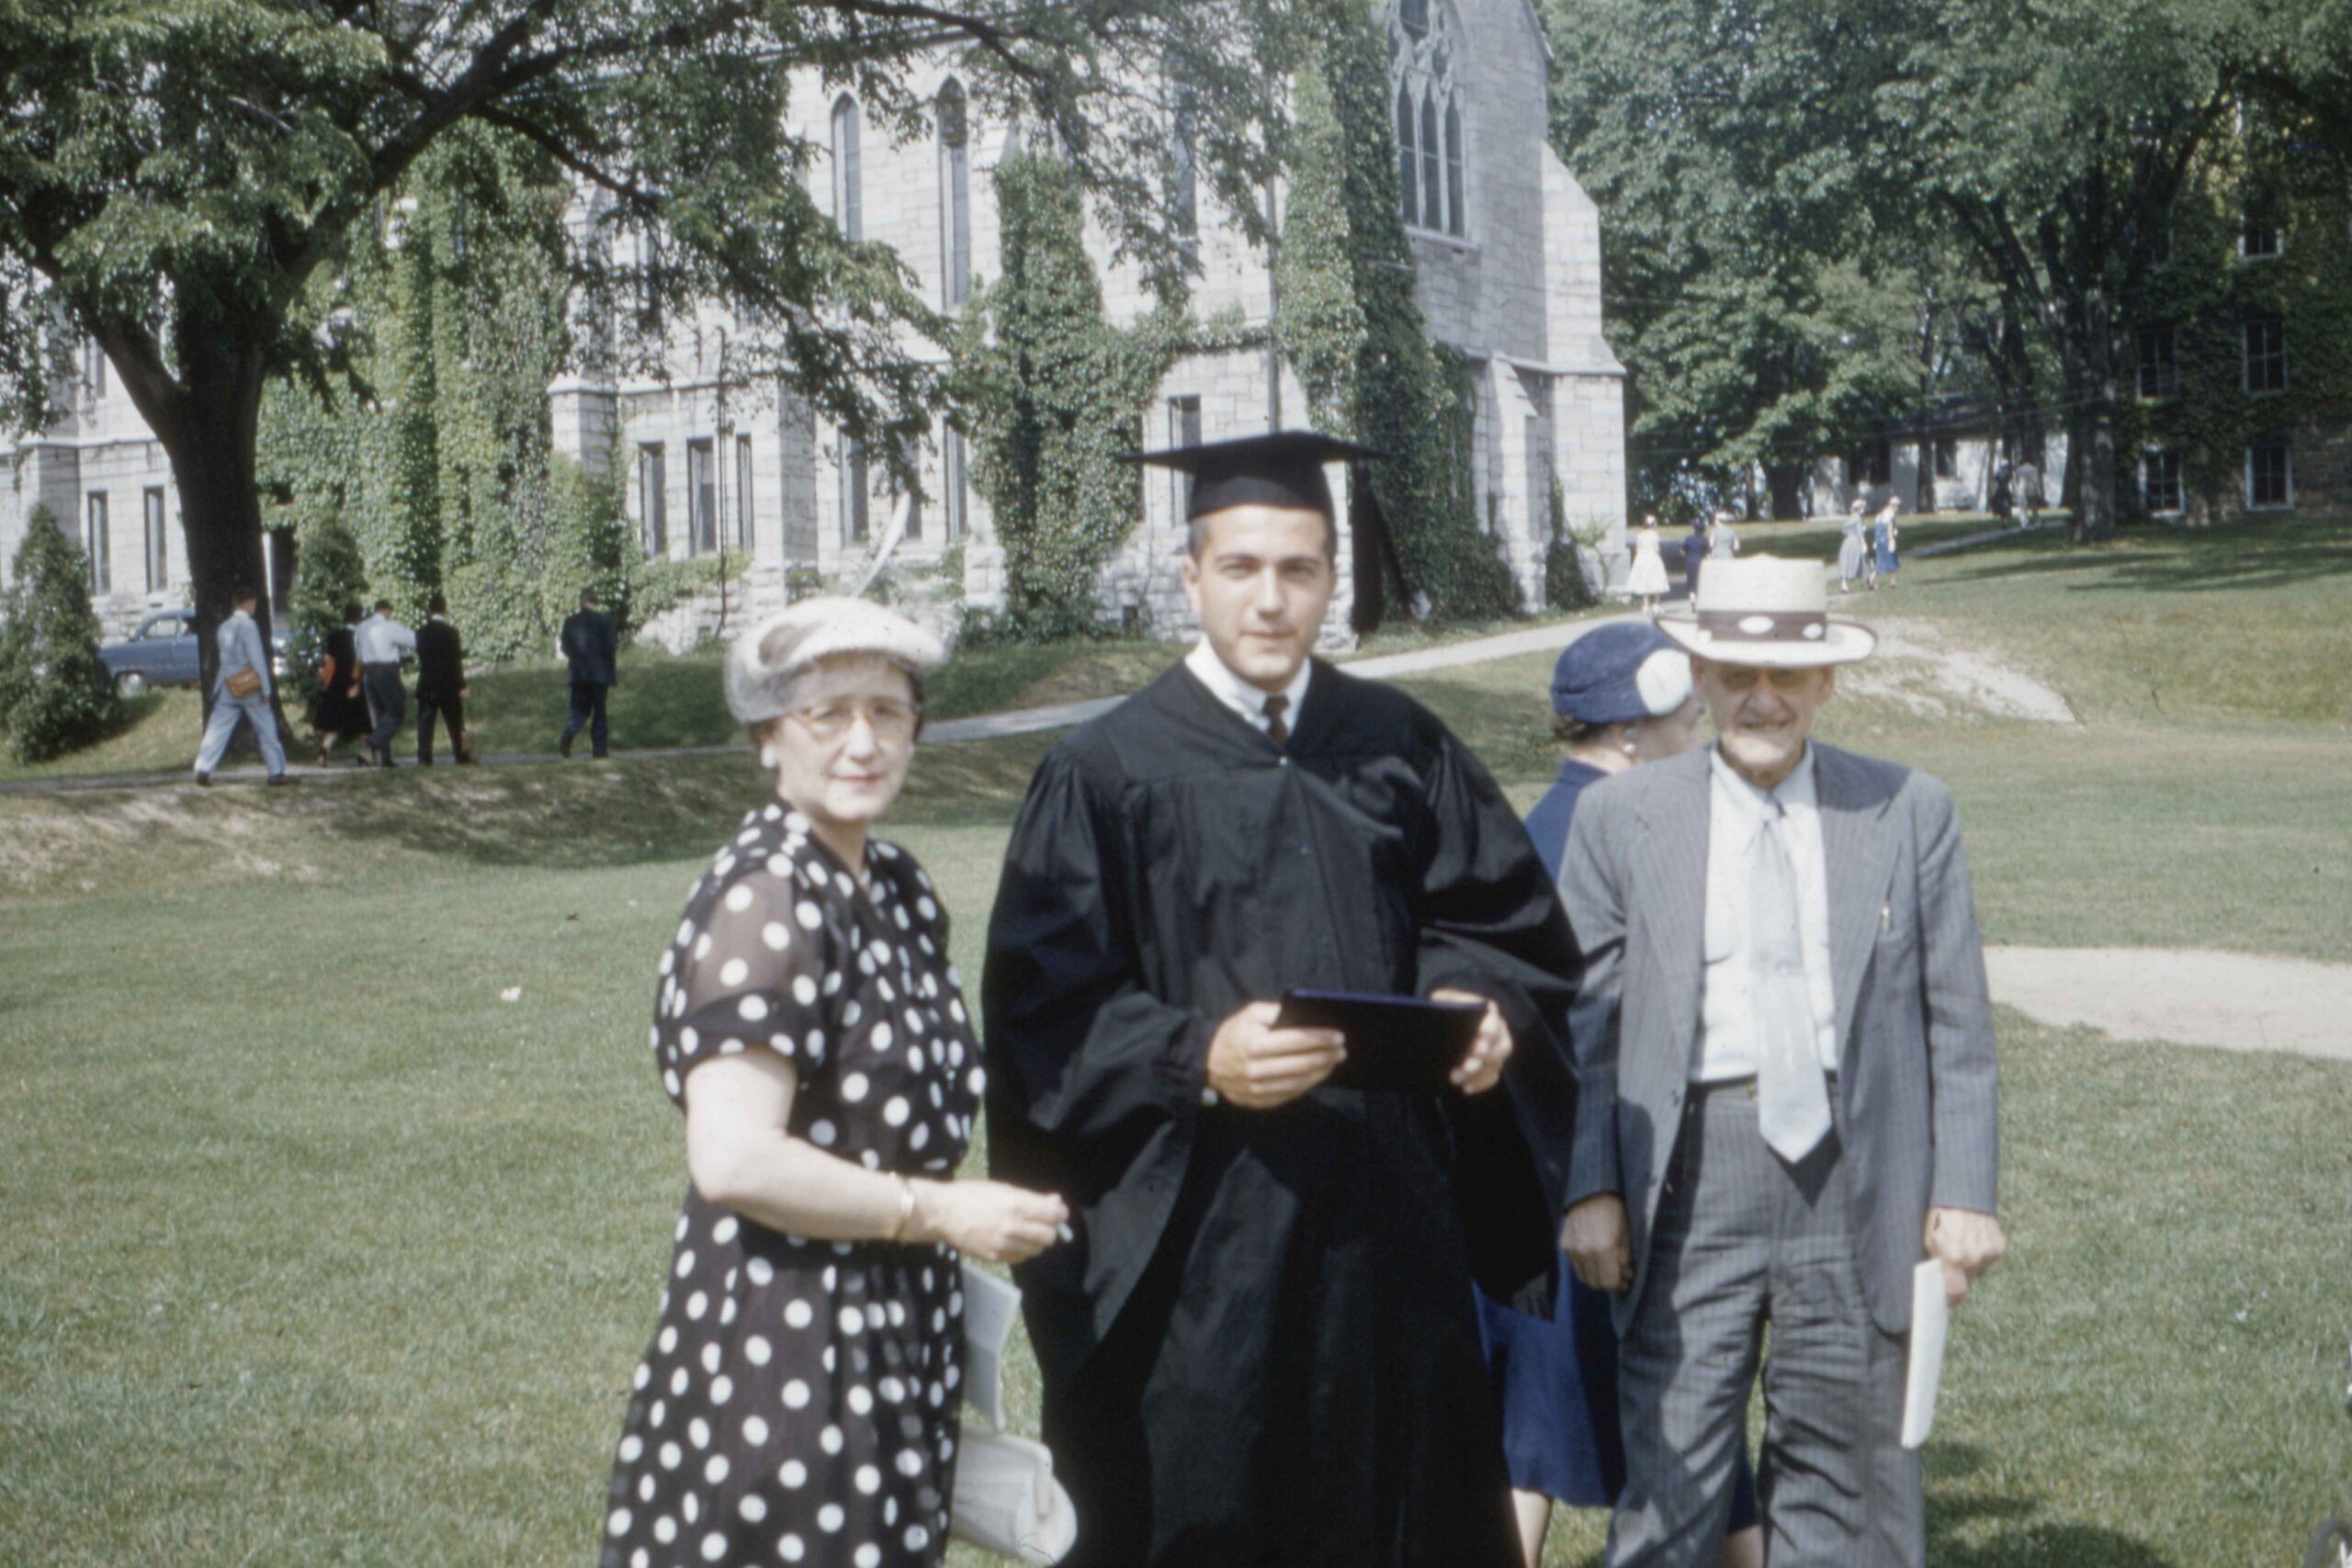 student with his parents on graduation day outside the university in 1962